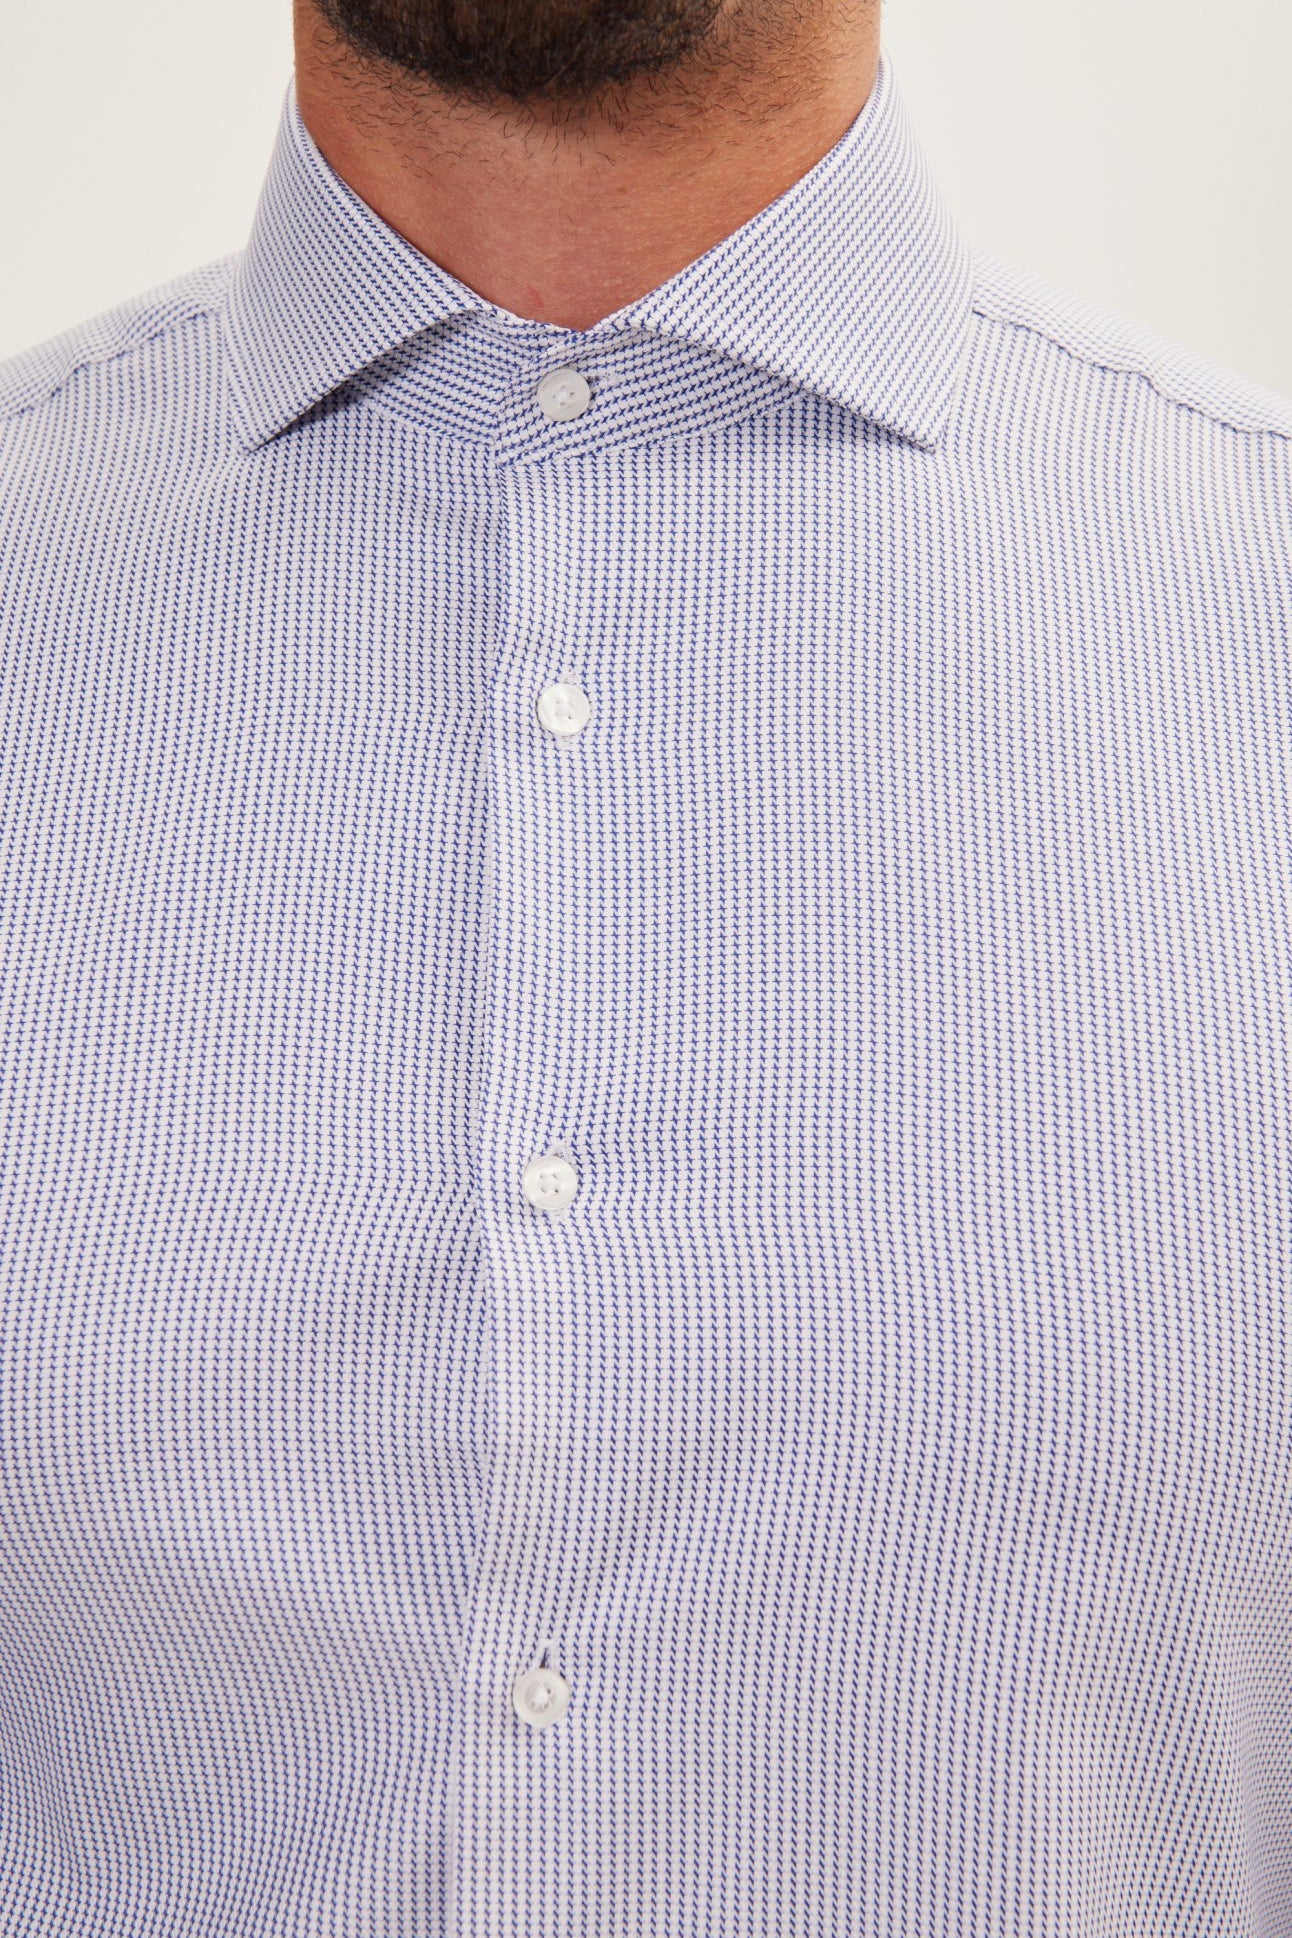 Pure Cotton French Placket Spread Collar Dress Shirt - Blue White Royal Oxford - Ron Tomson